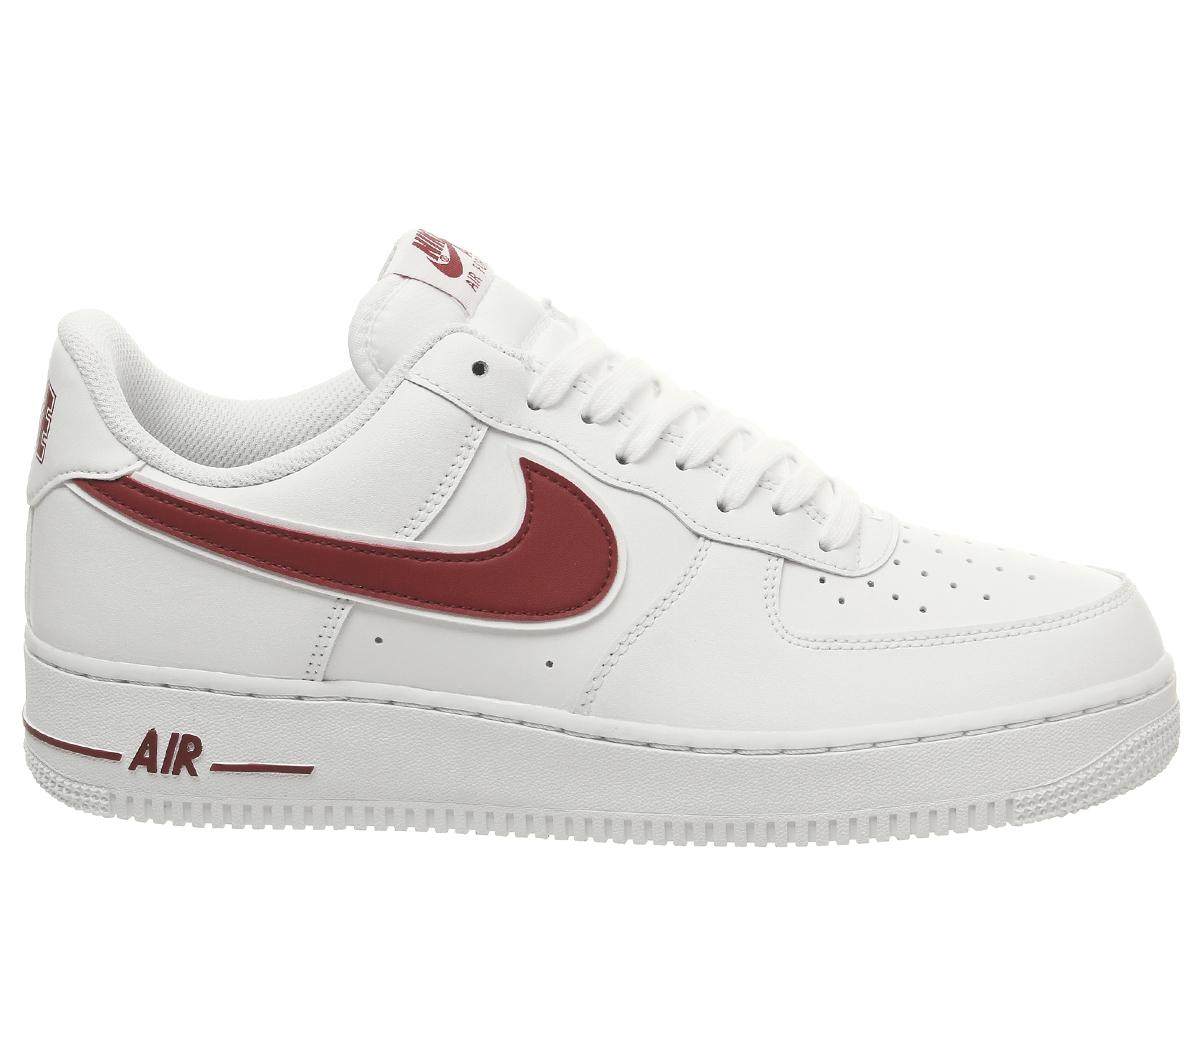 Nike Nike Air Force One Trainers White Gym Red - Junior